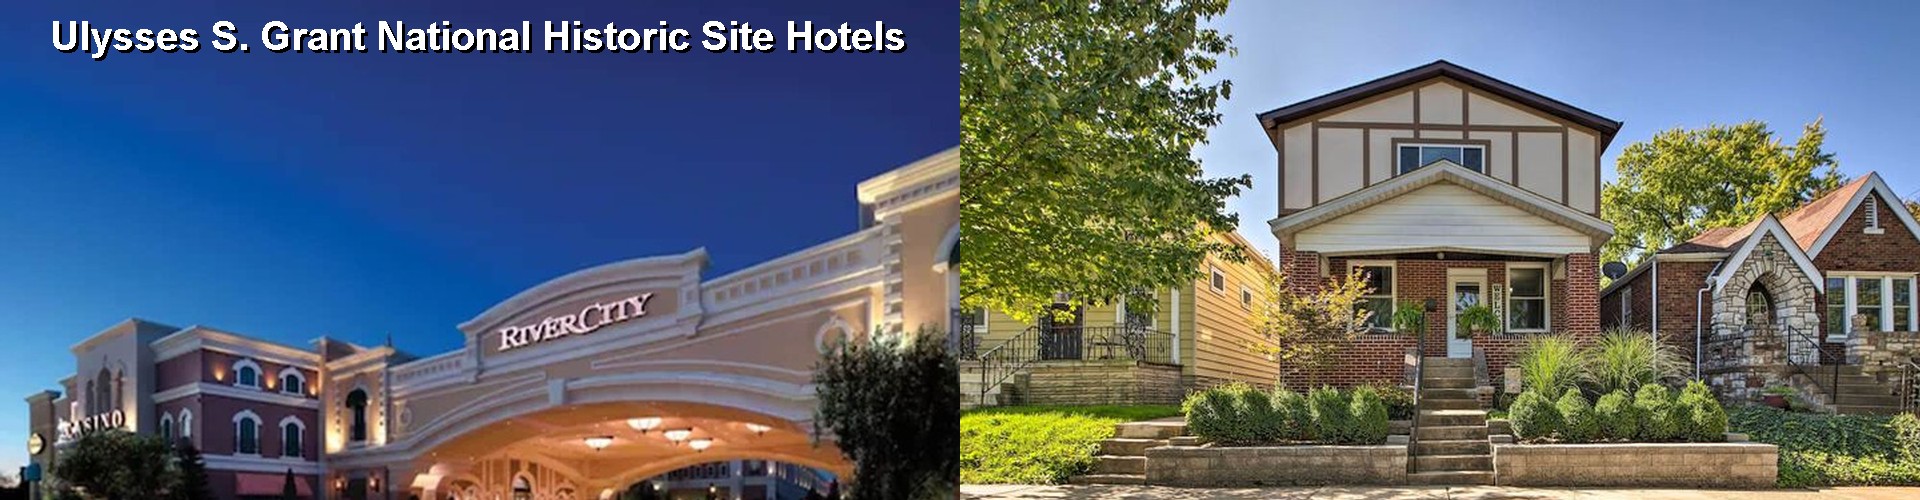 3 Best Hotels near Ulysses S. Grant National Historic Site